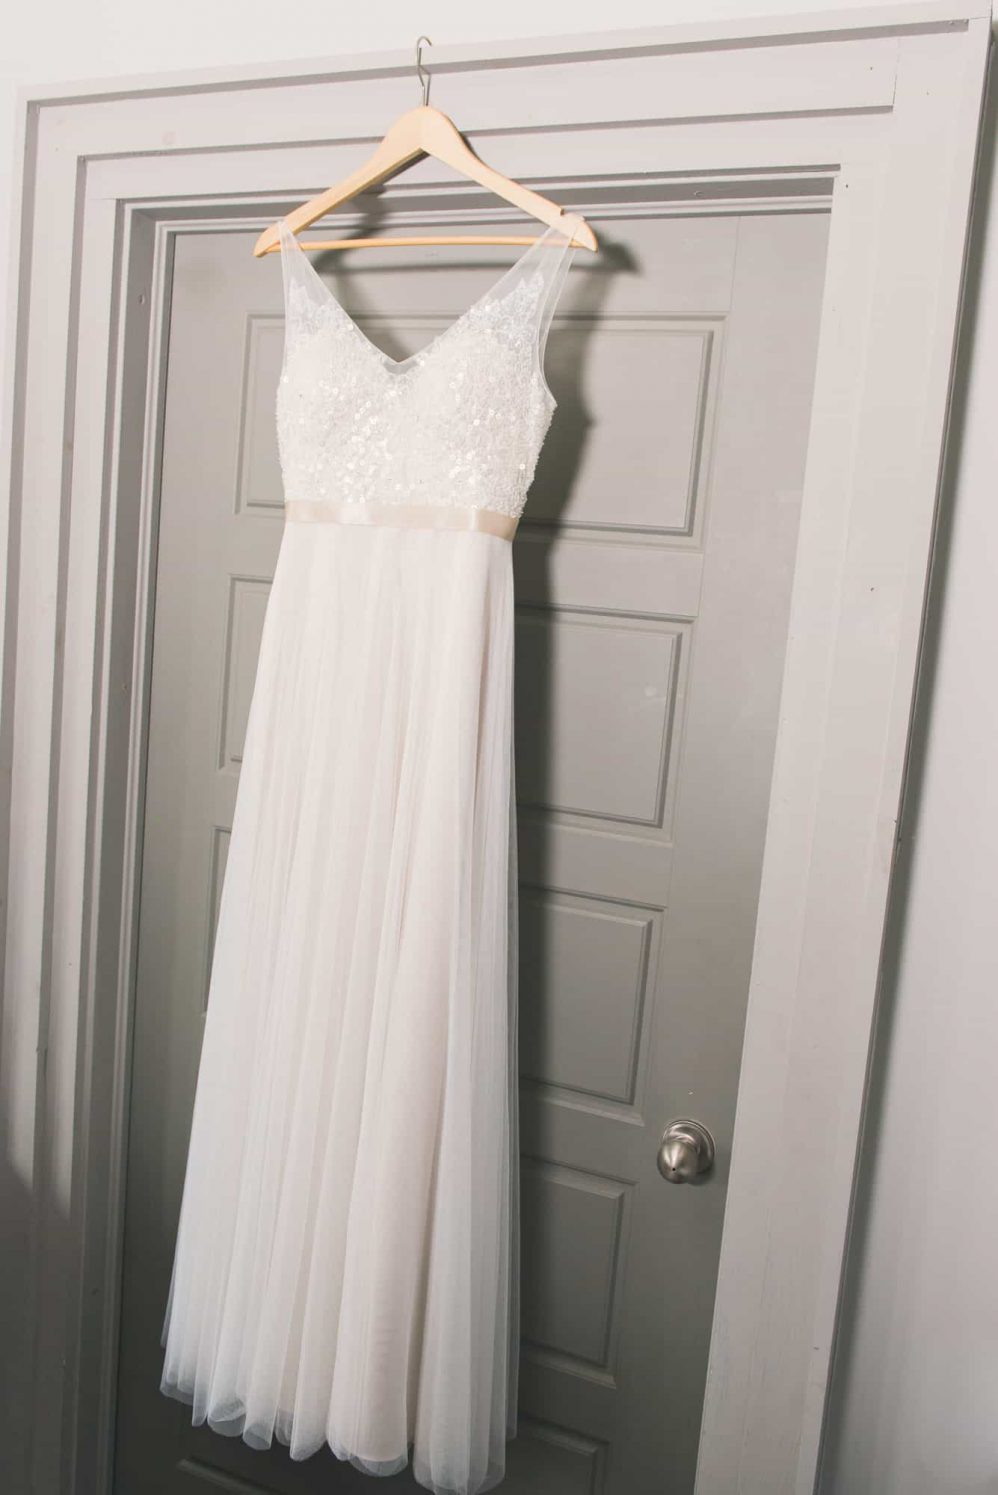 A brides wedding dress hangs prior to being worn for the wedding day.